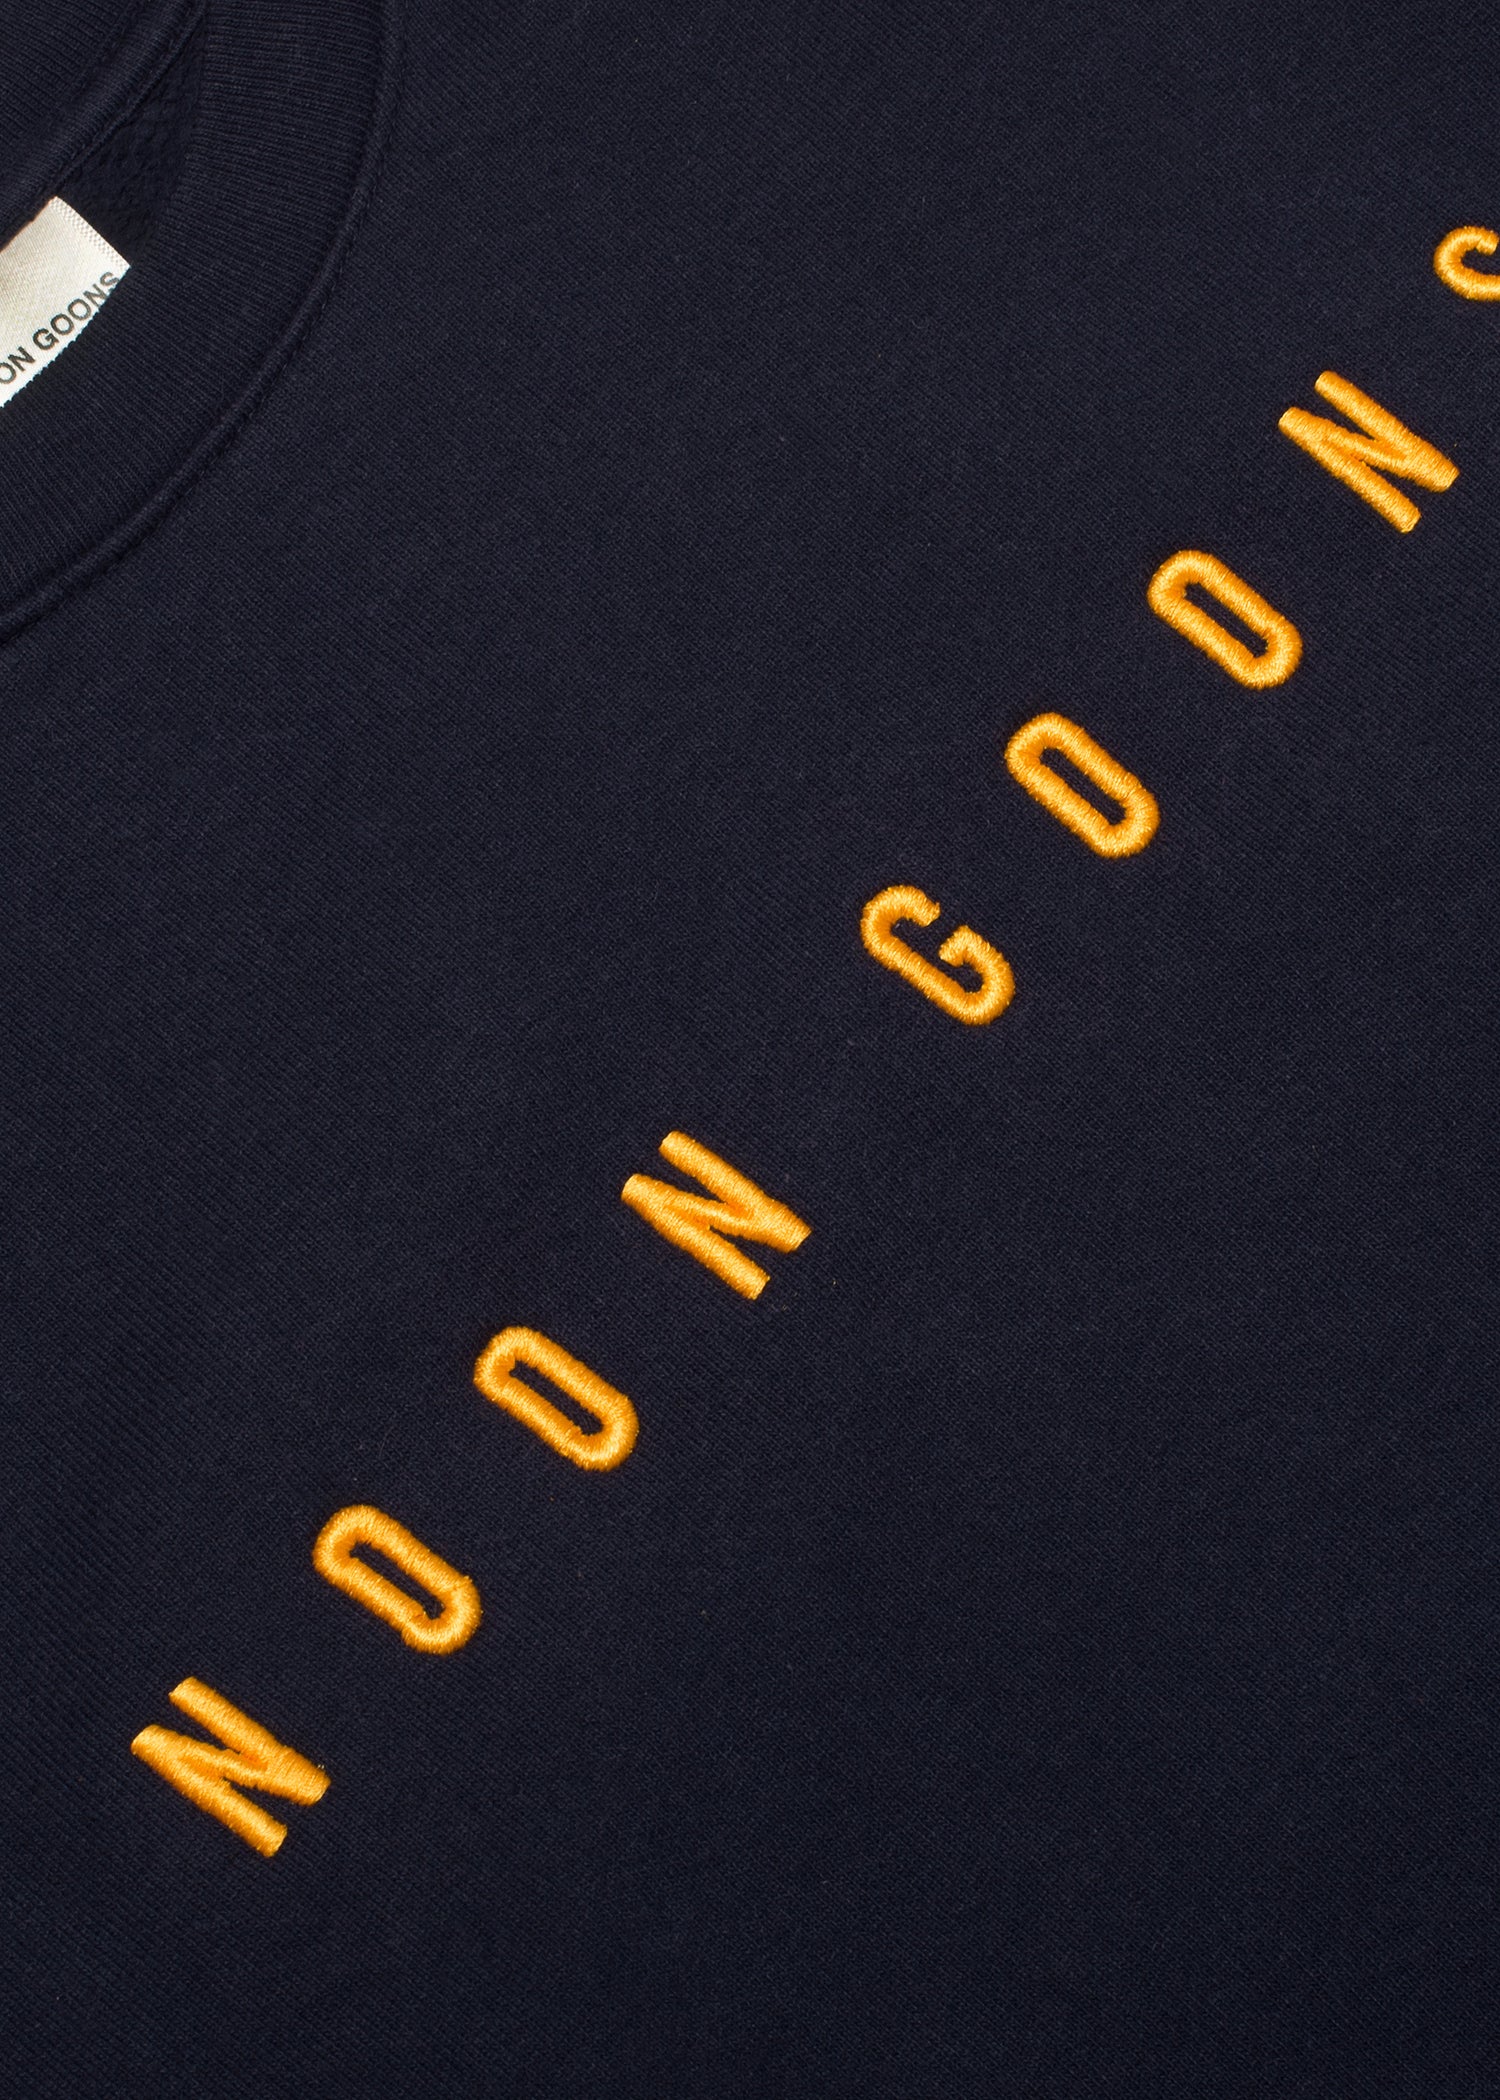 Noon Goons Is Gold - Navy